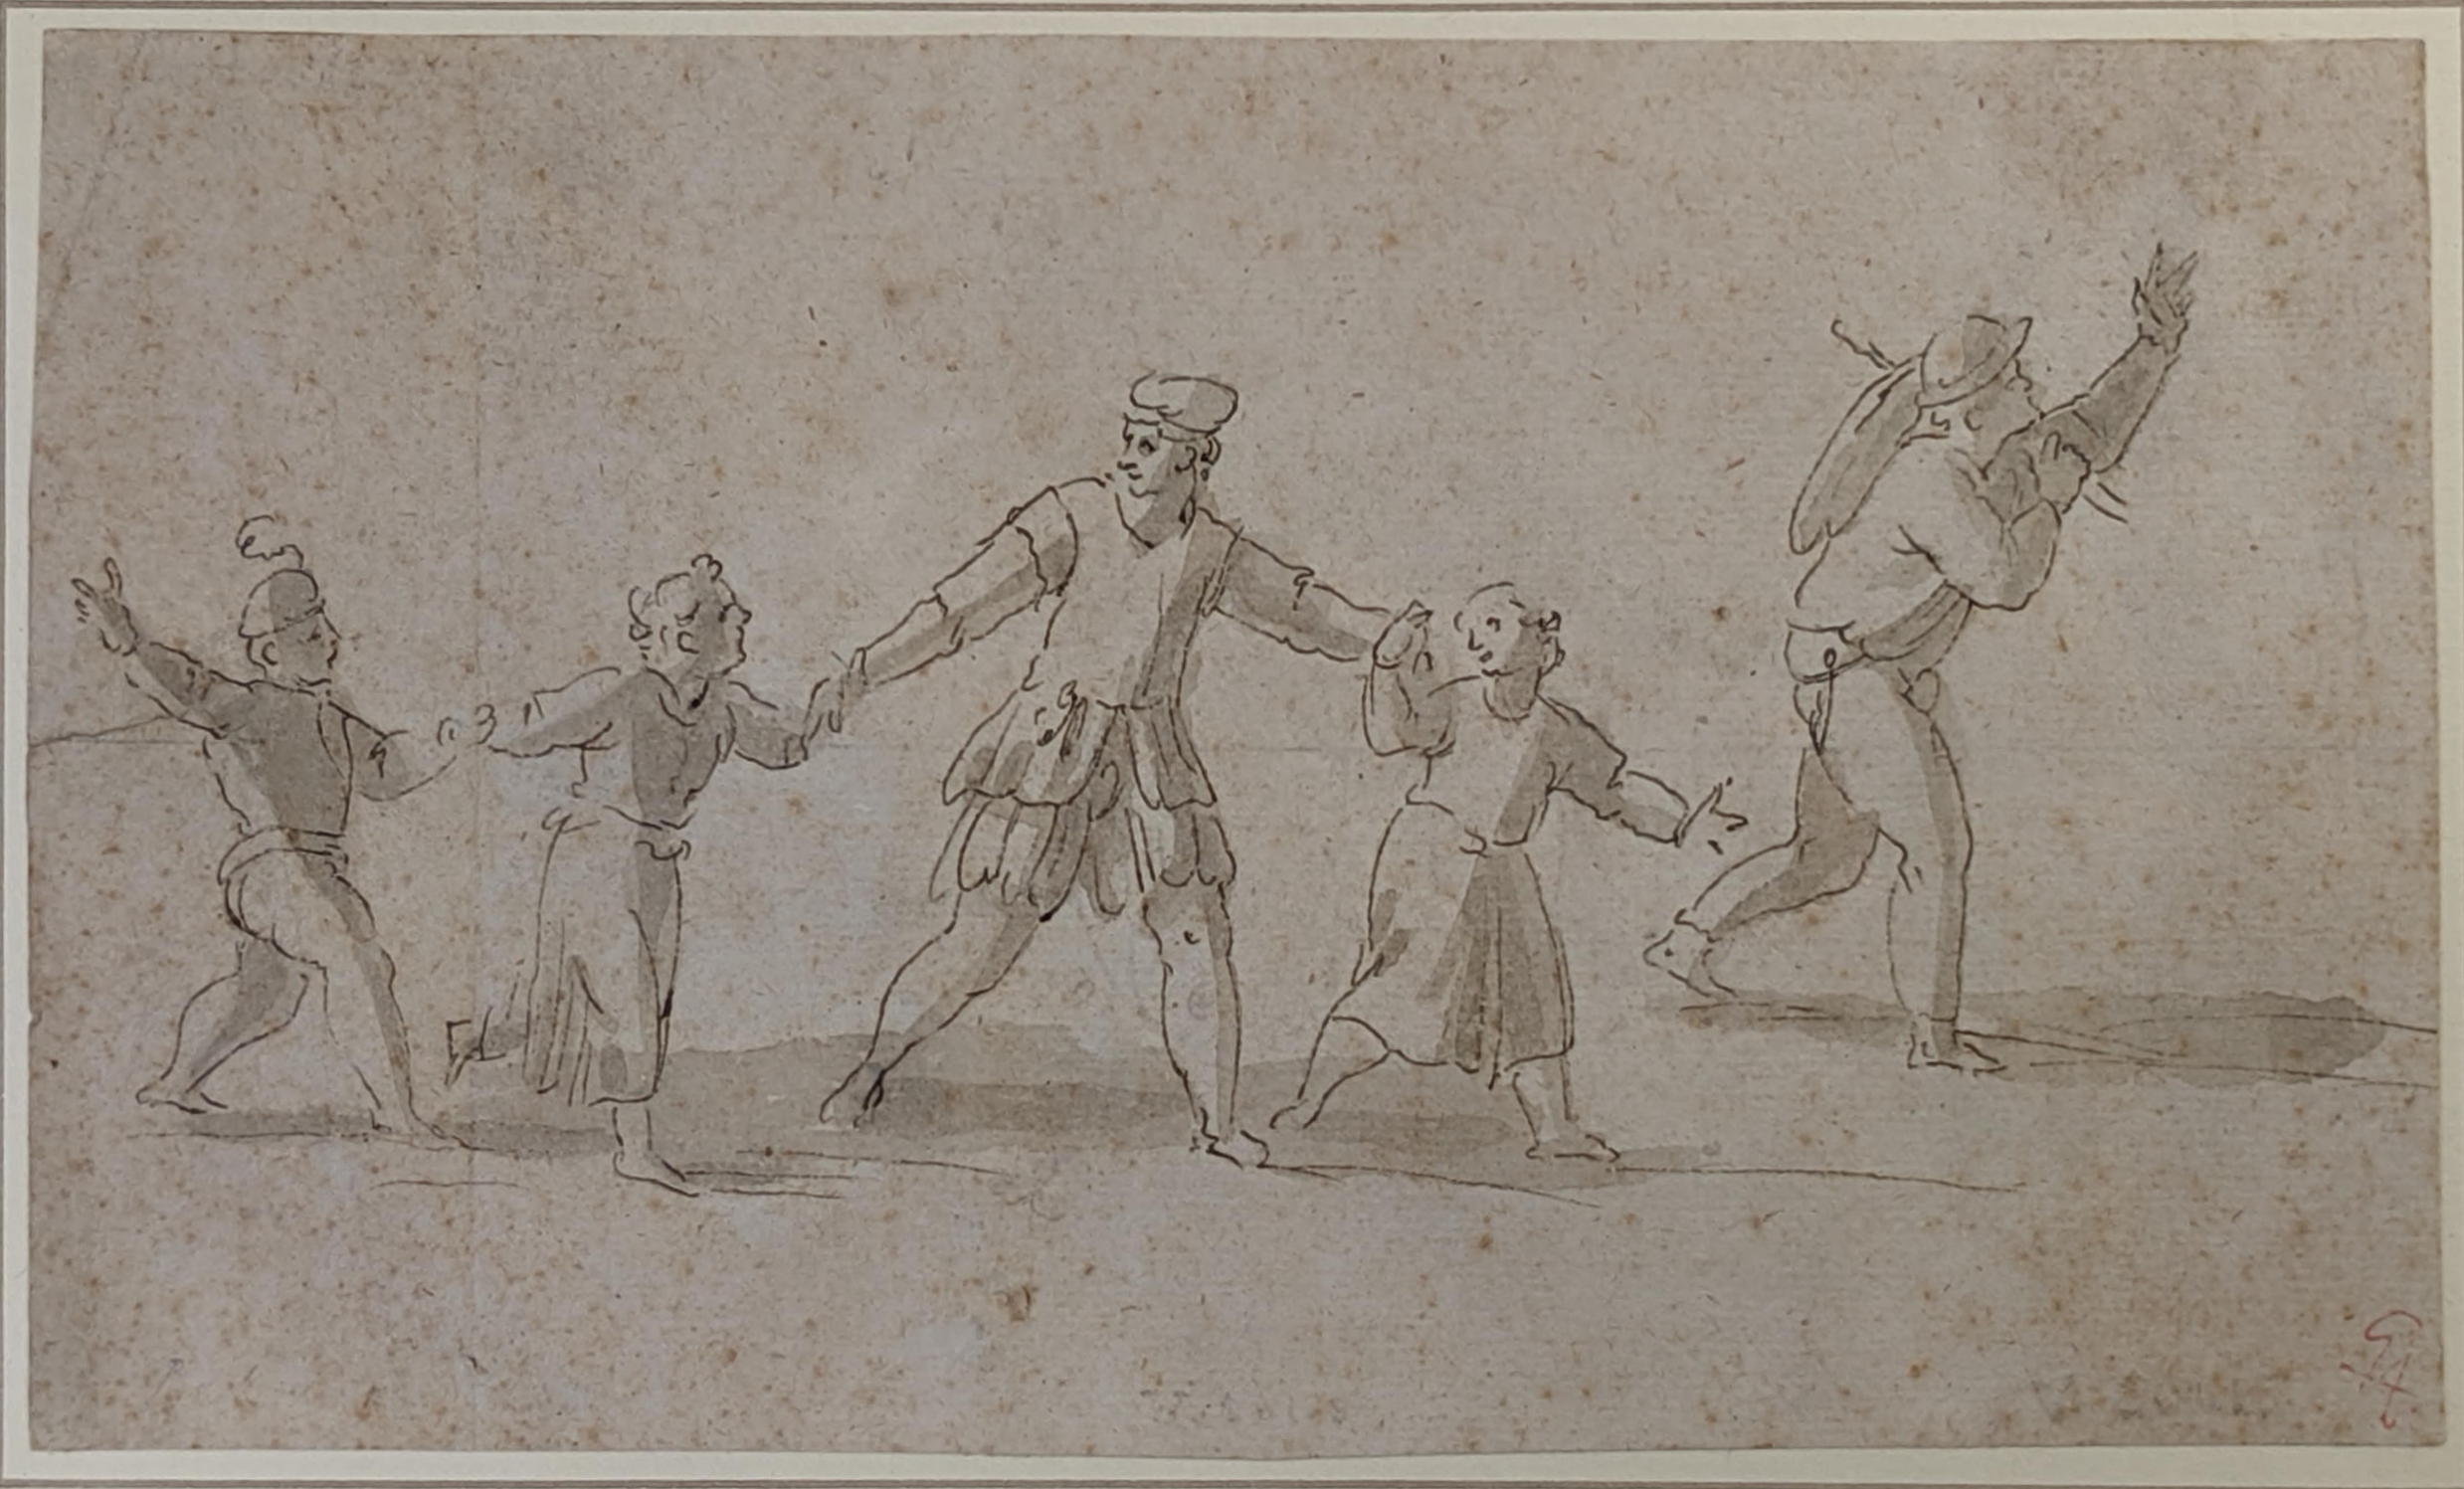 17th century Continental School, scene of children playing, ink wash drawing on paper, collectors